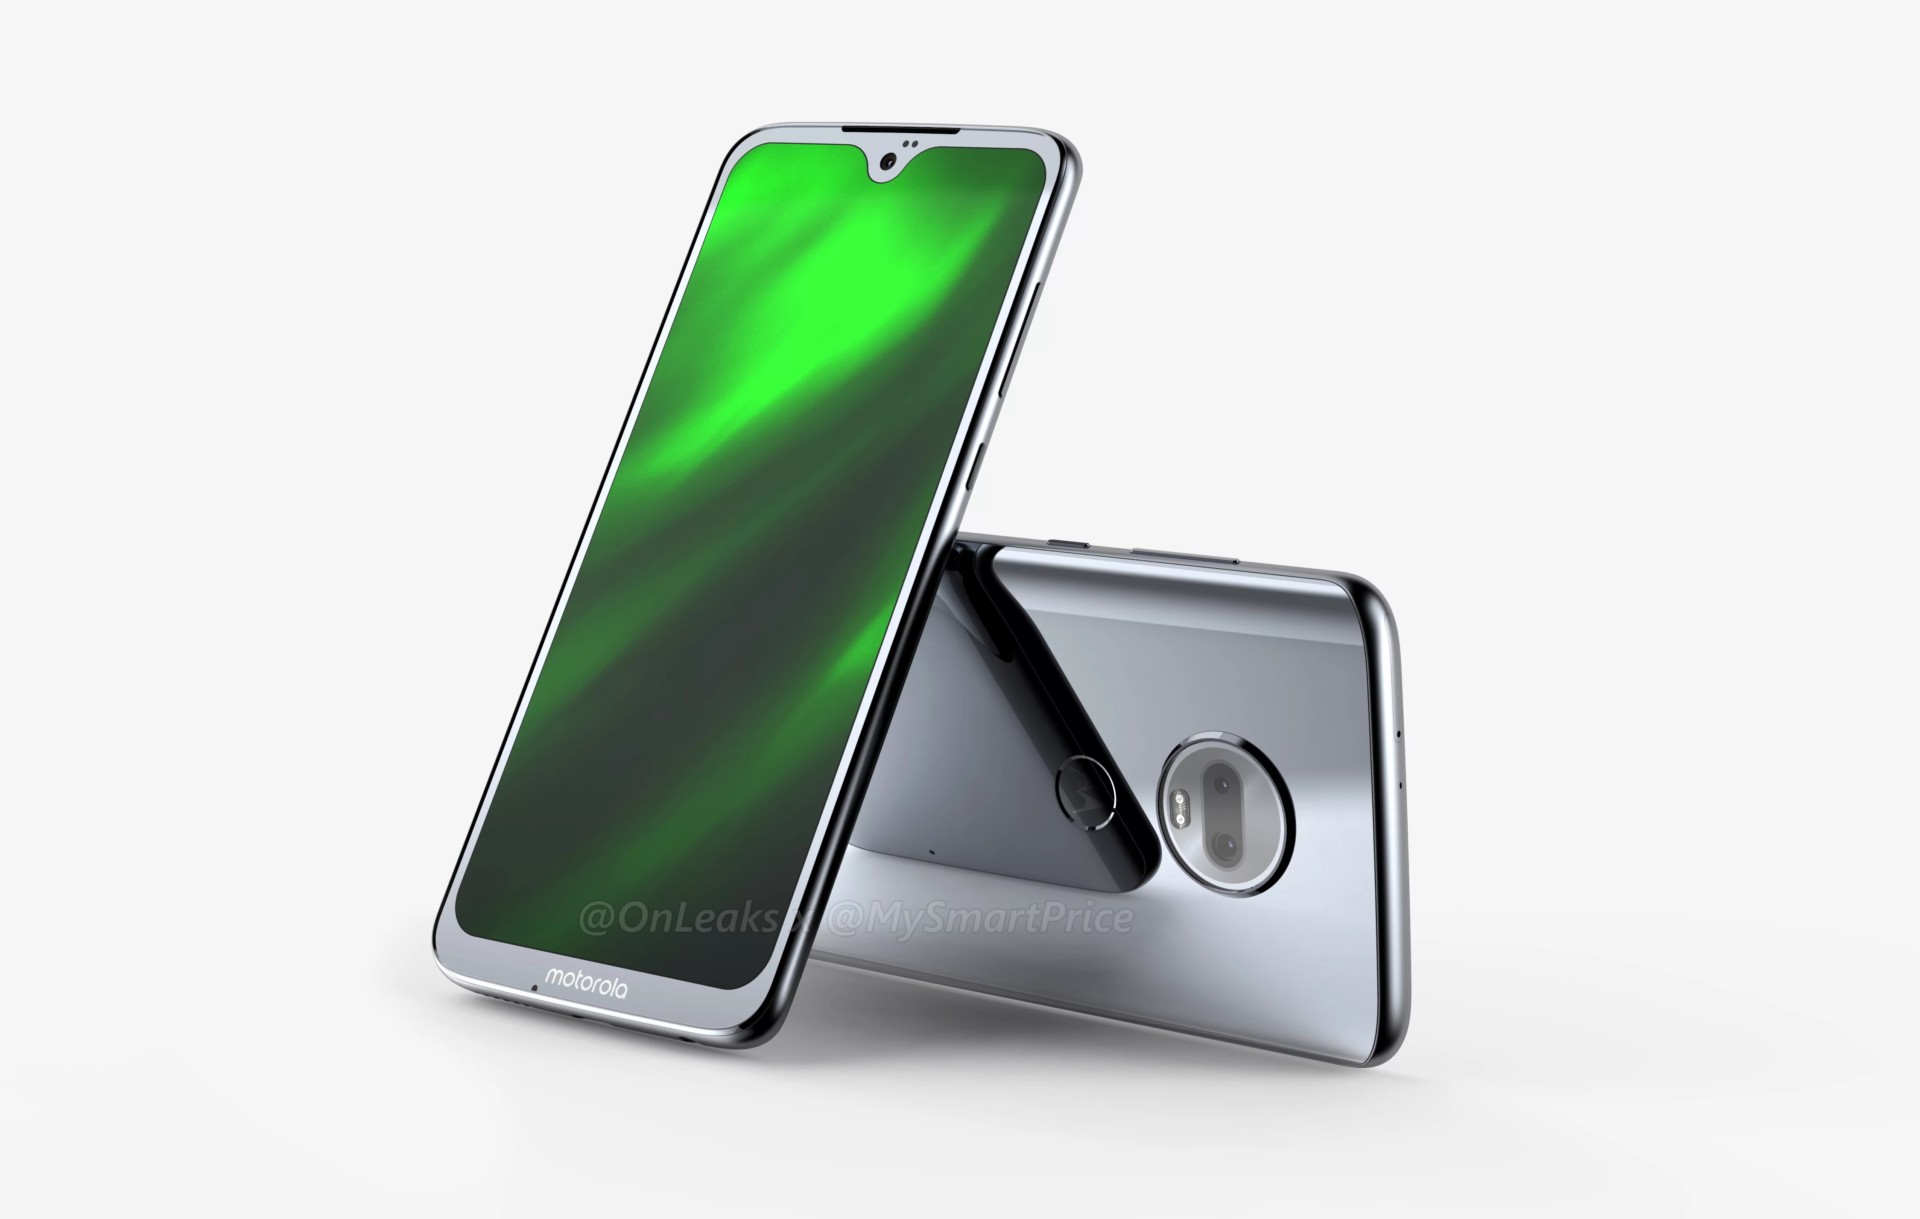 Moto G7 render images of the device in silver with a green display.